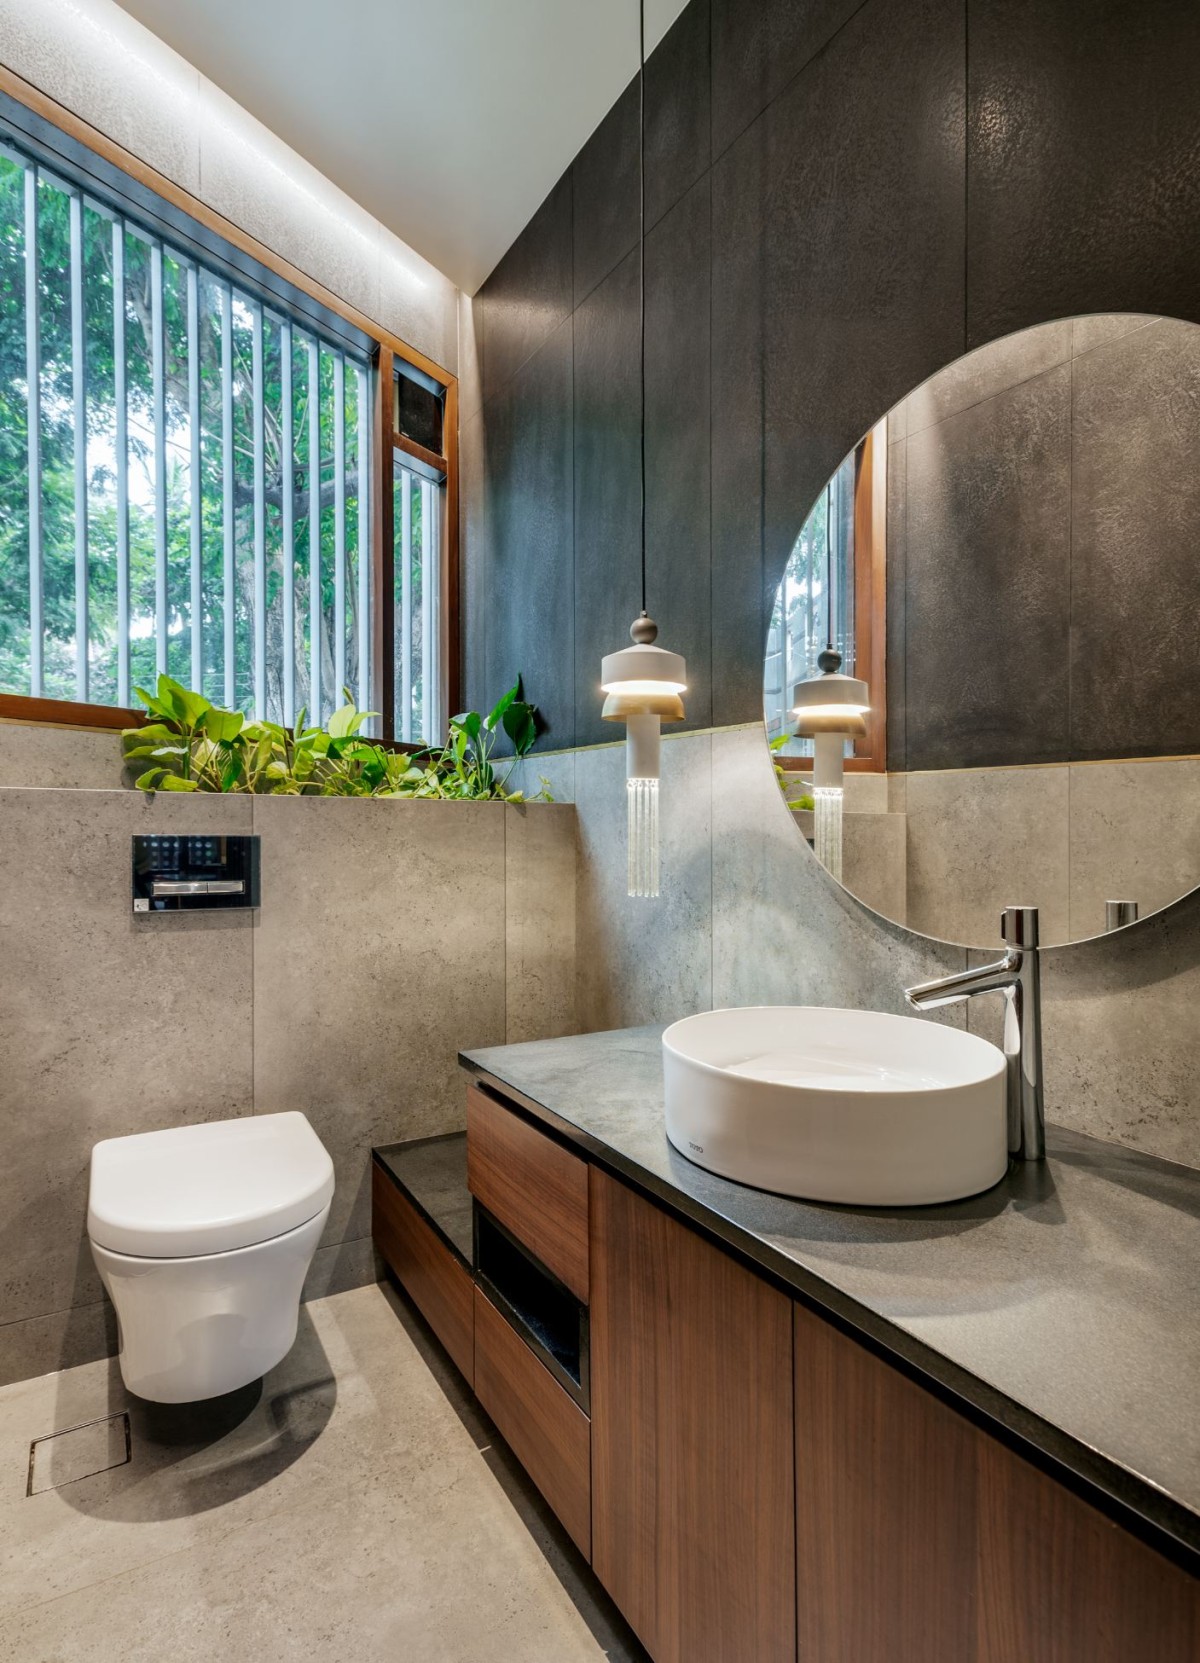 Toilet of Cloaked Residence by Cadence Architects